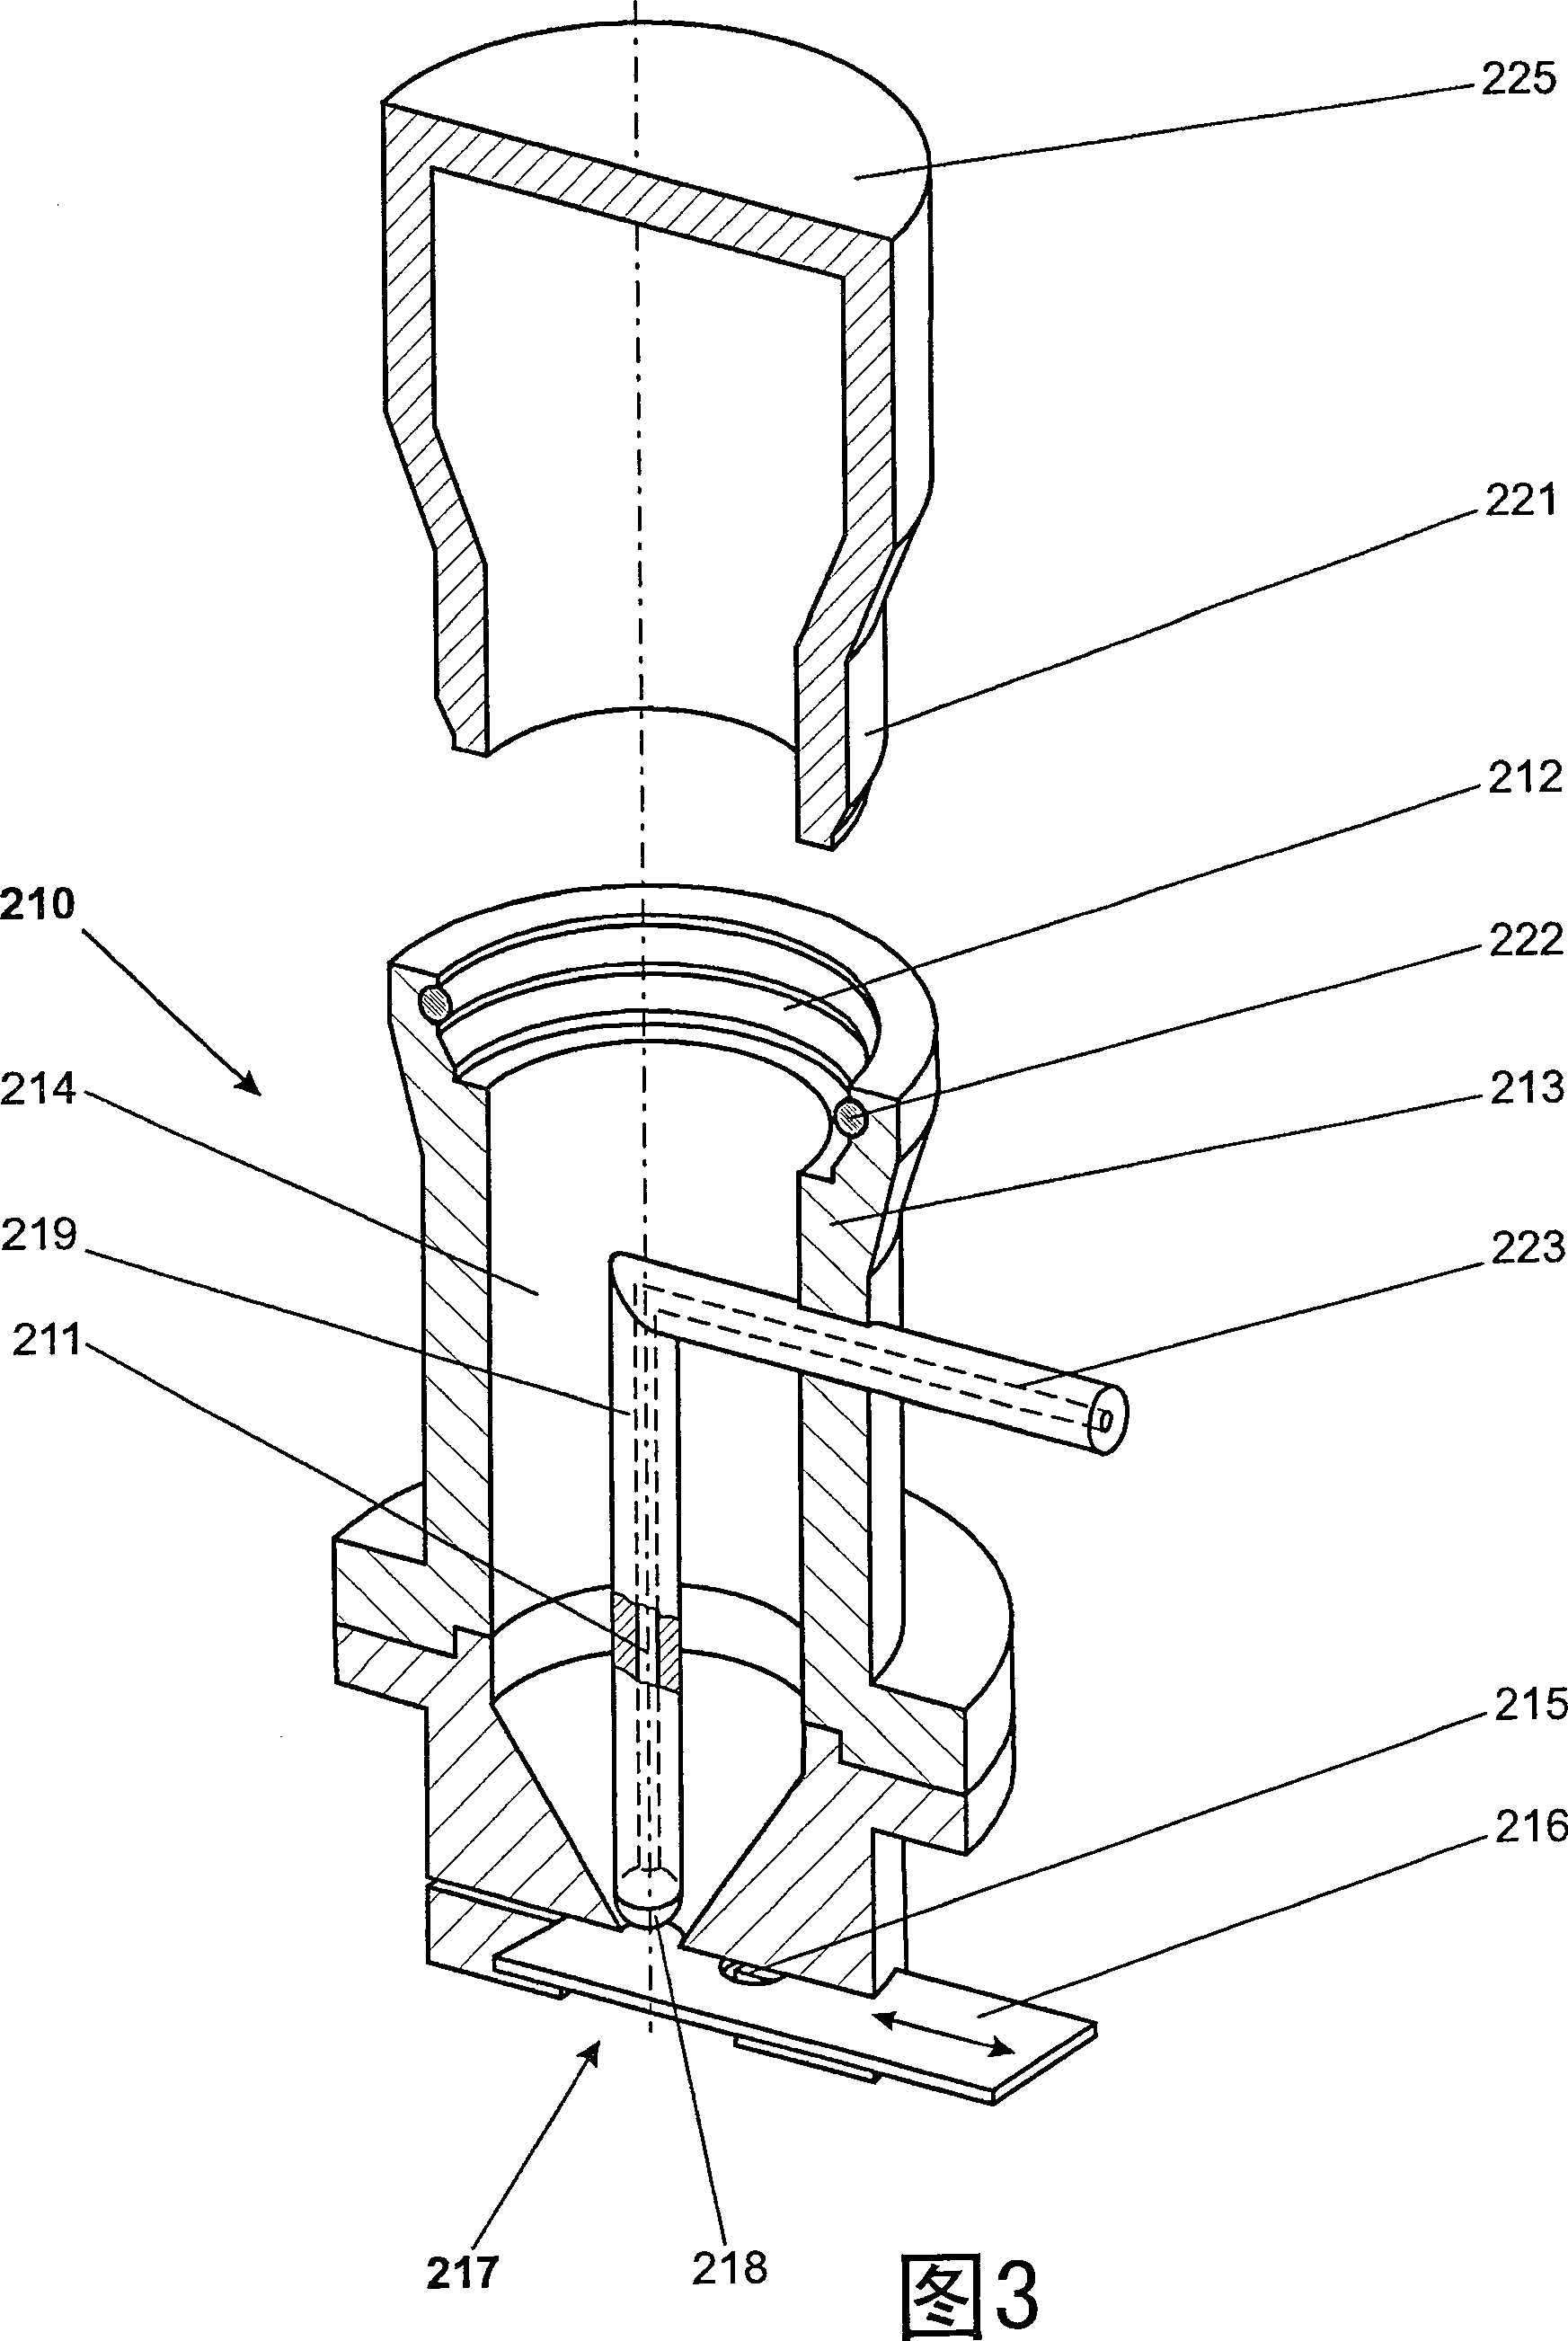 Dosage-dispensing device and dosage-dispensing unit with an electrostatic closure device